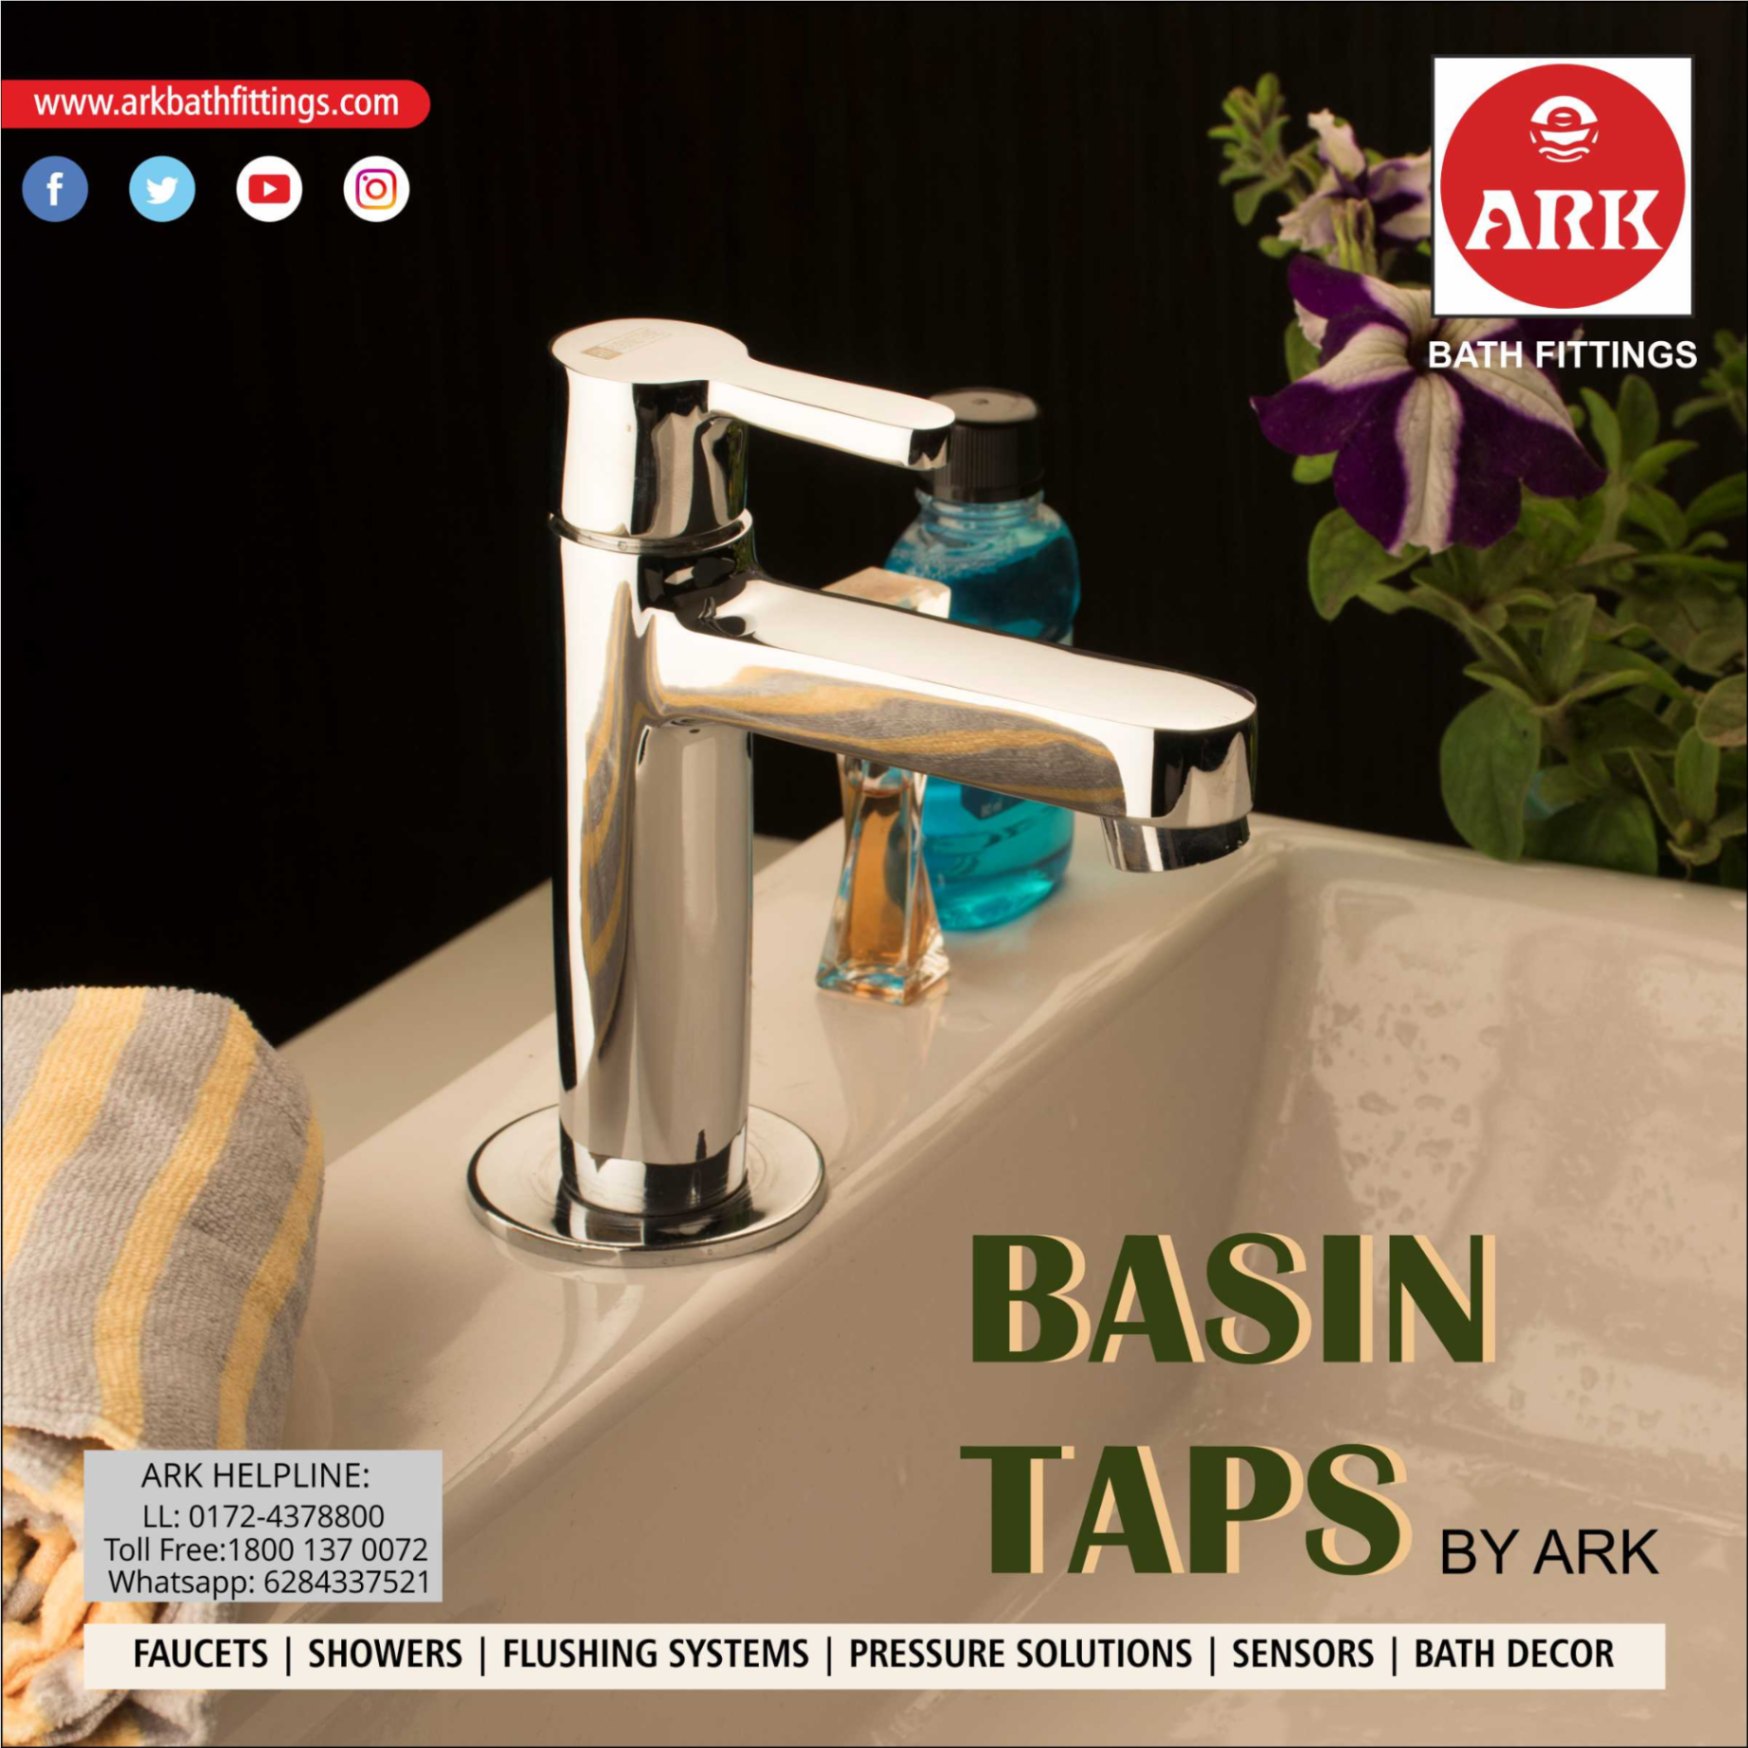 ARK: Your Premier Destination for Sanitary Fittings and Accessories